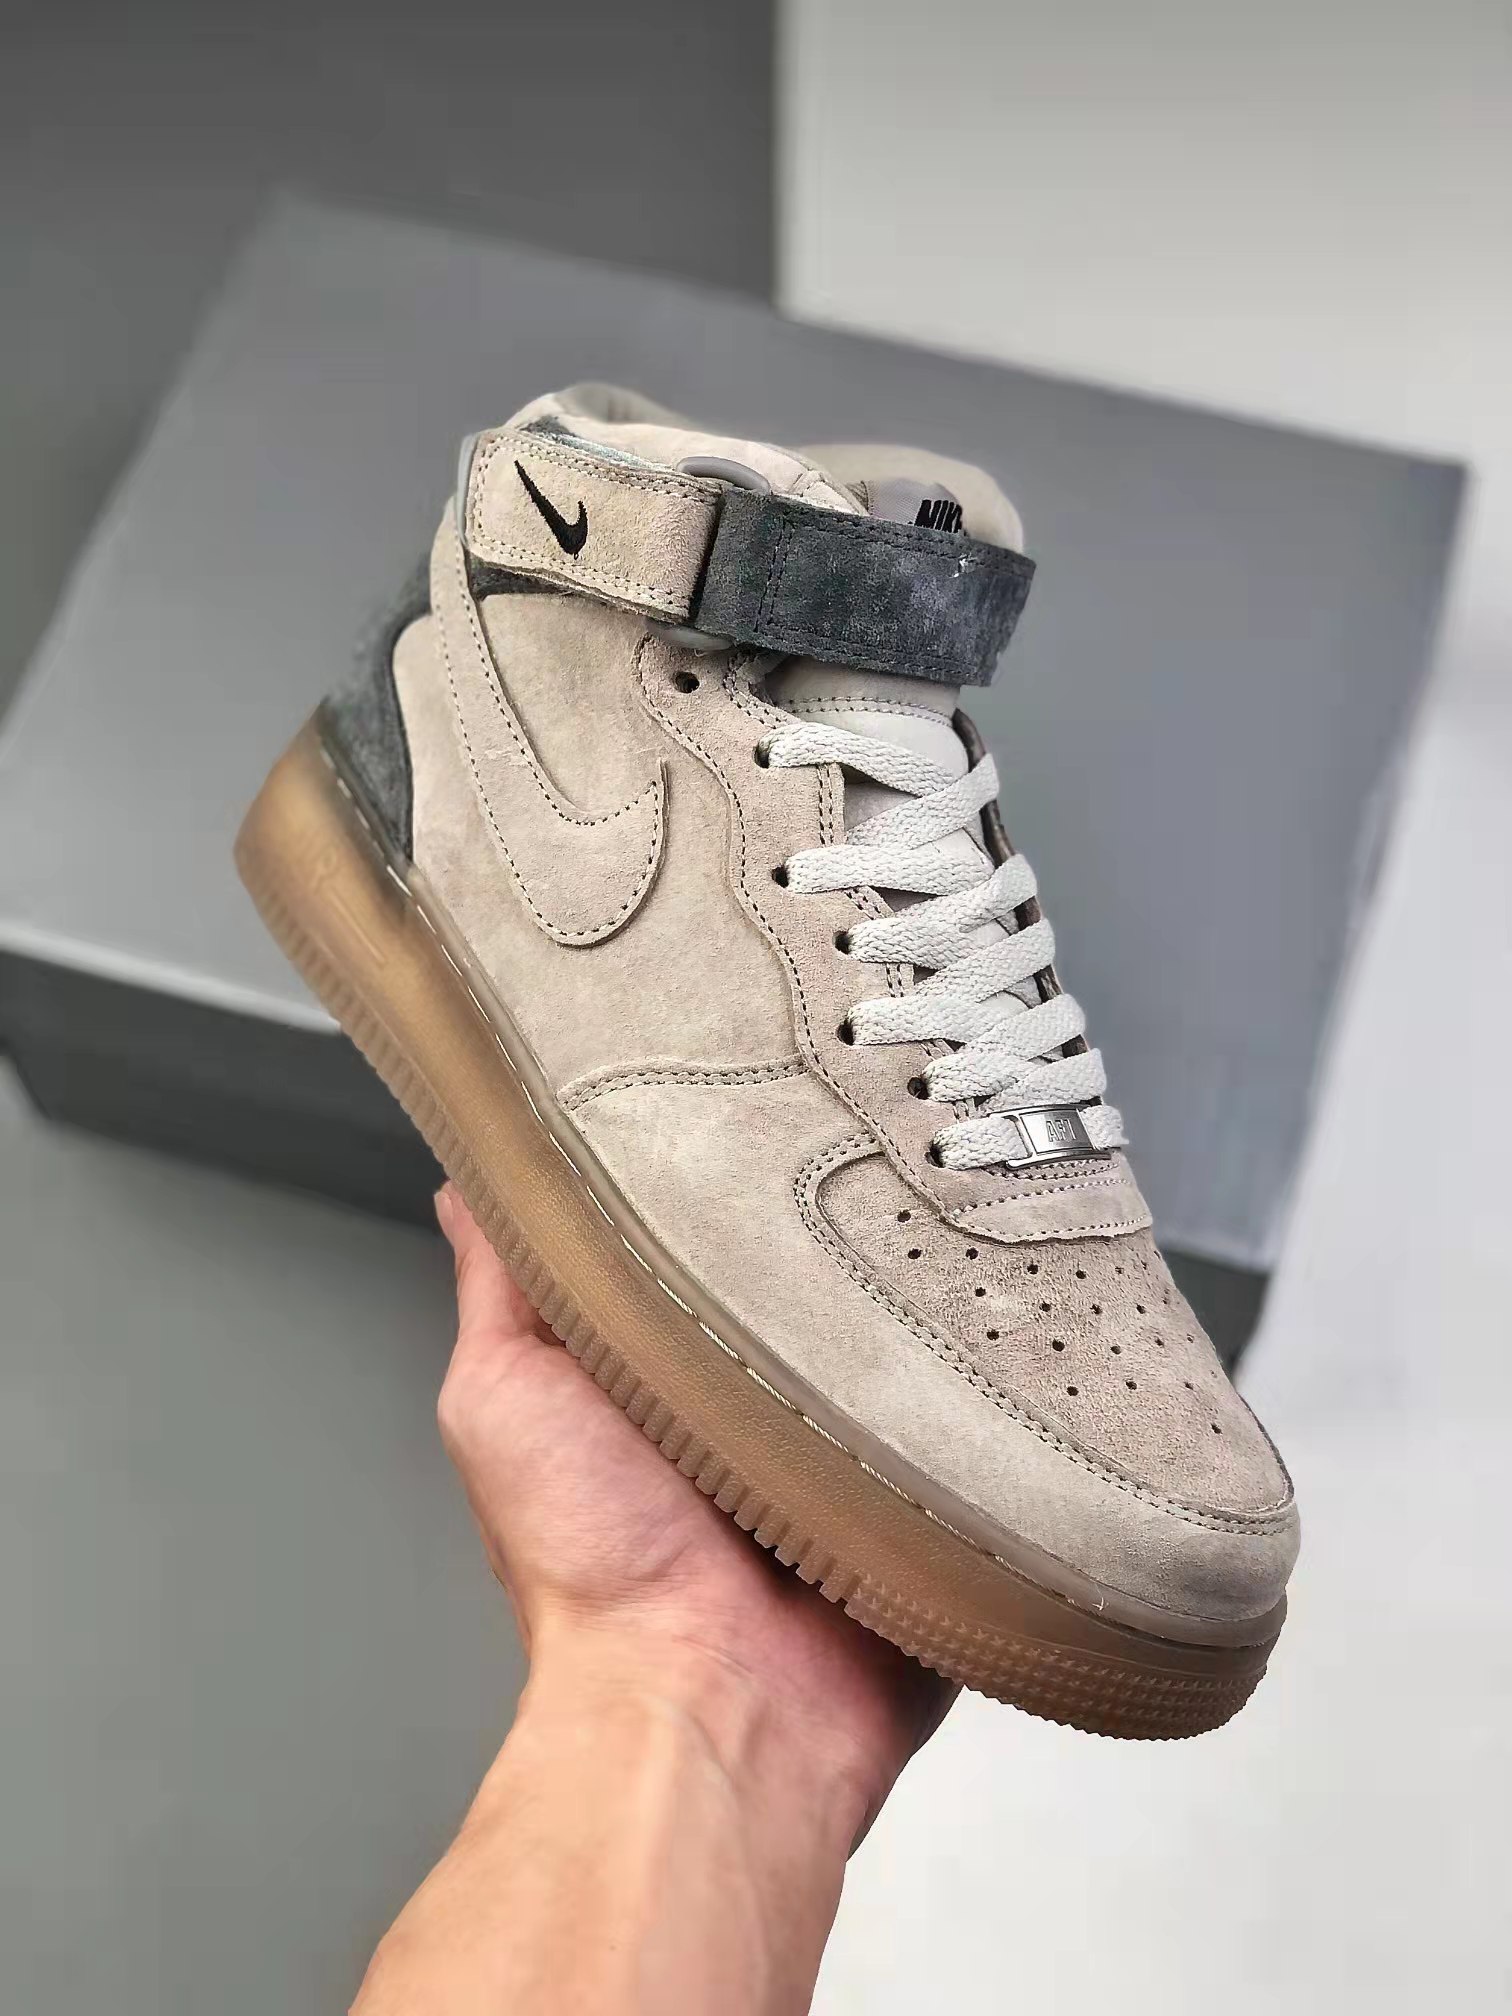 Nike Reigning Champ x Nike Air Force 1 Mid 'Grey Black' 807618-200 | Limited Edition